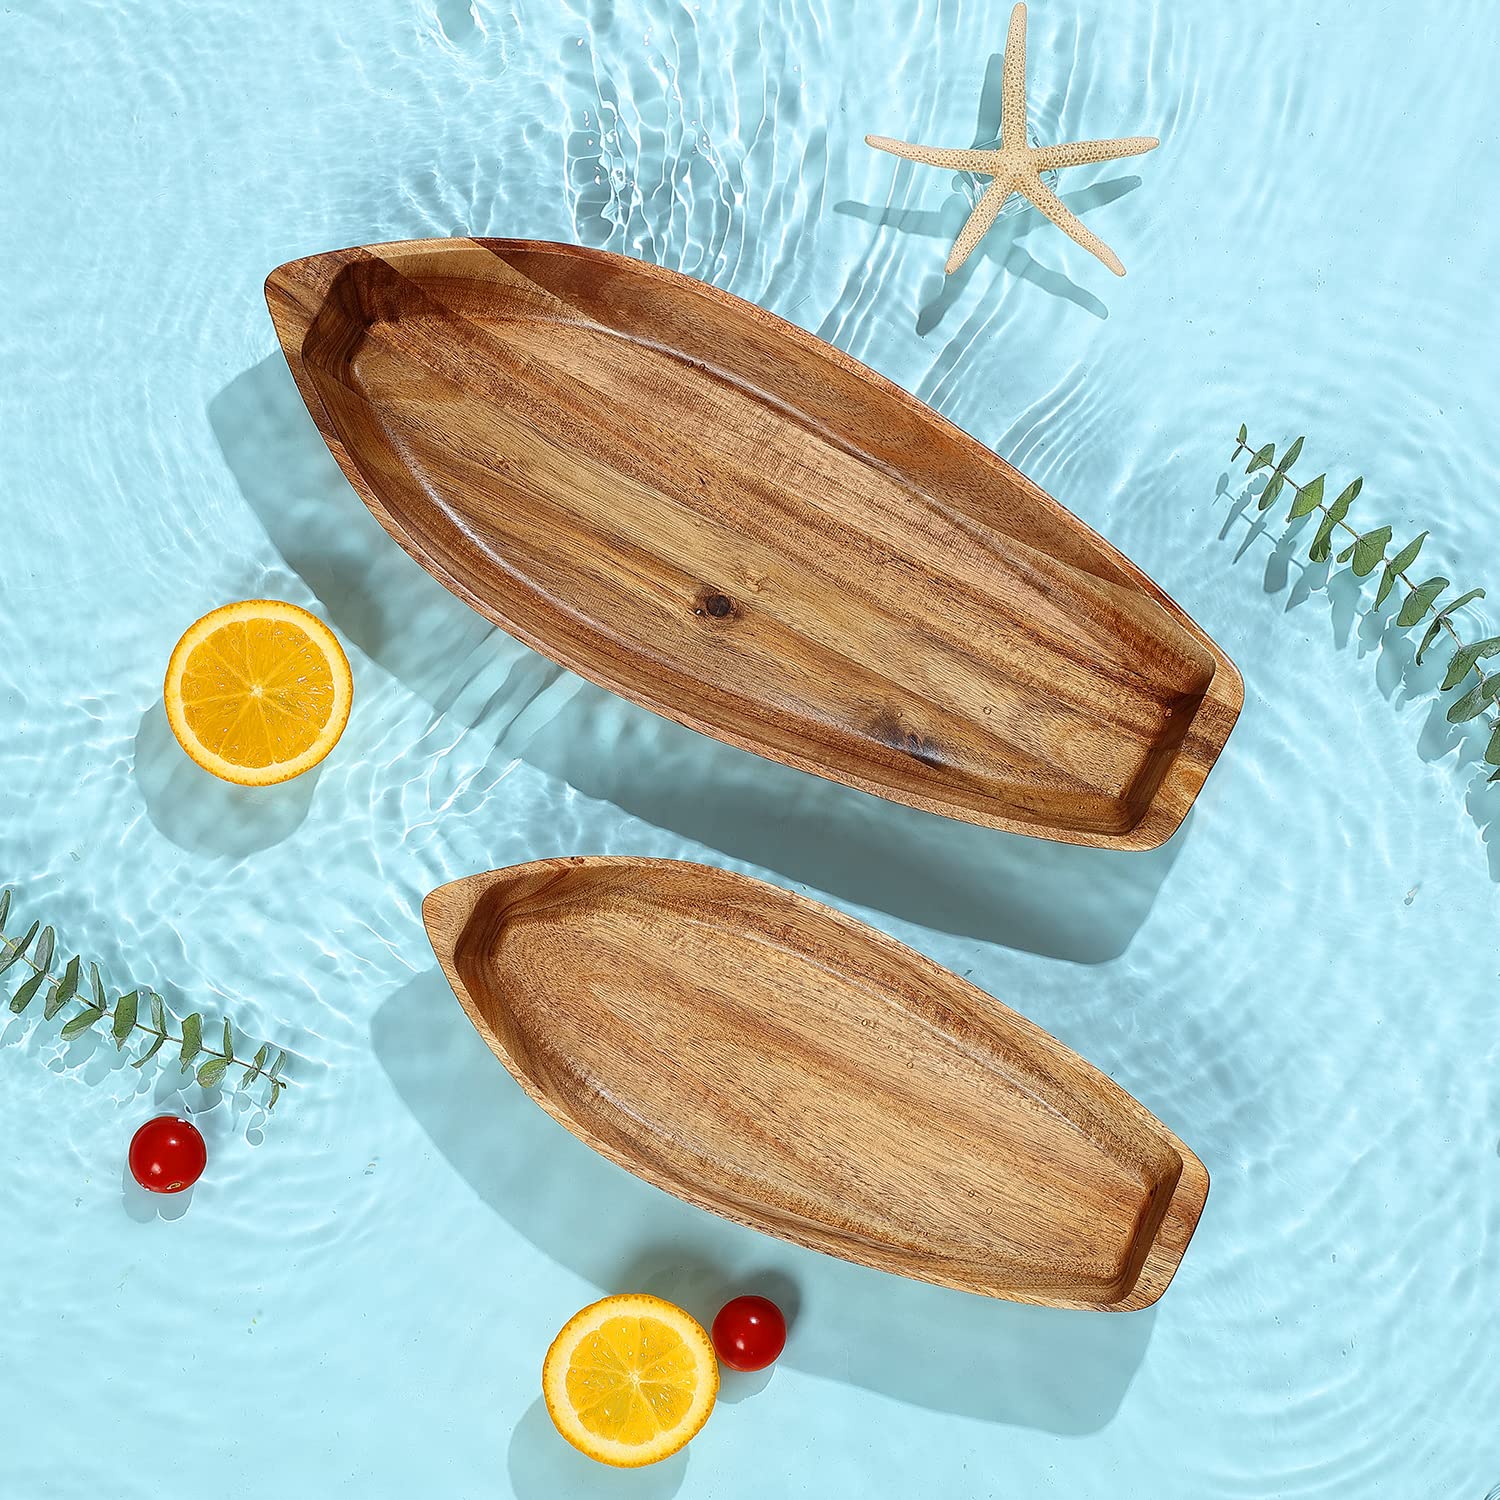 C-Joy Wood Decorative Wooden Tray, Nature Acacia Solid Wood Serving Bowls,for Desserts Fruits Salad or House Ornament, Functional and Collectible Furnishing Articles. (Lucky Boat (2 of Set))